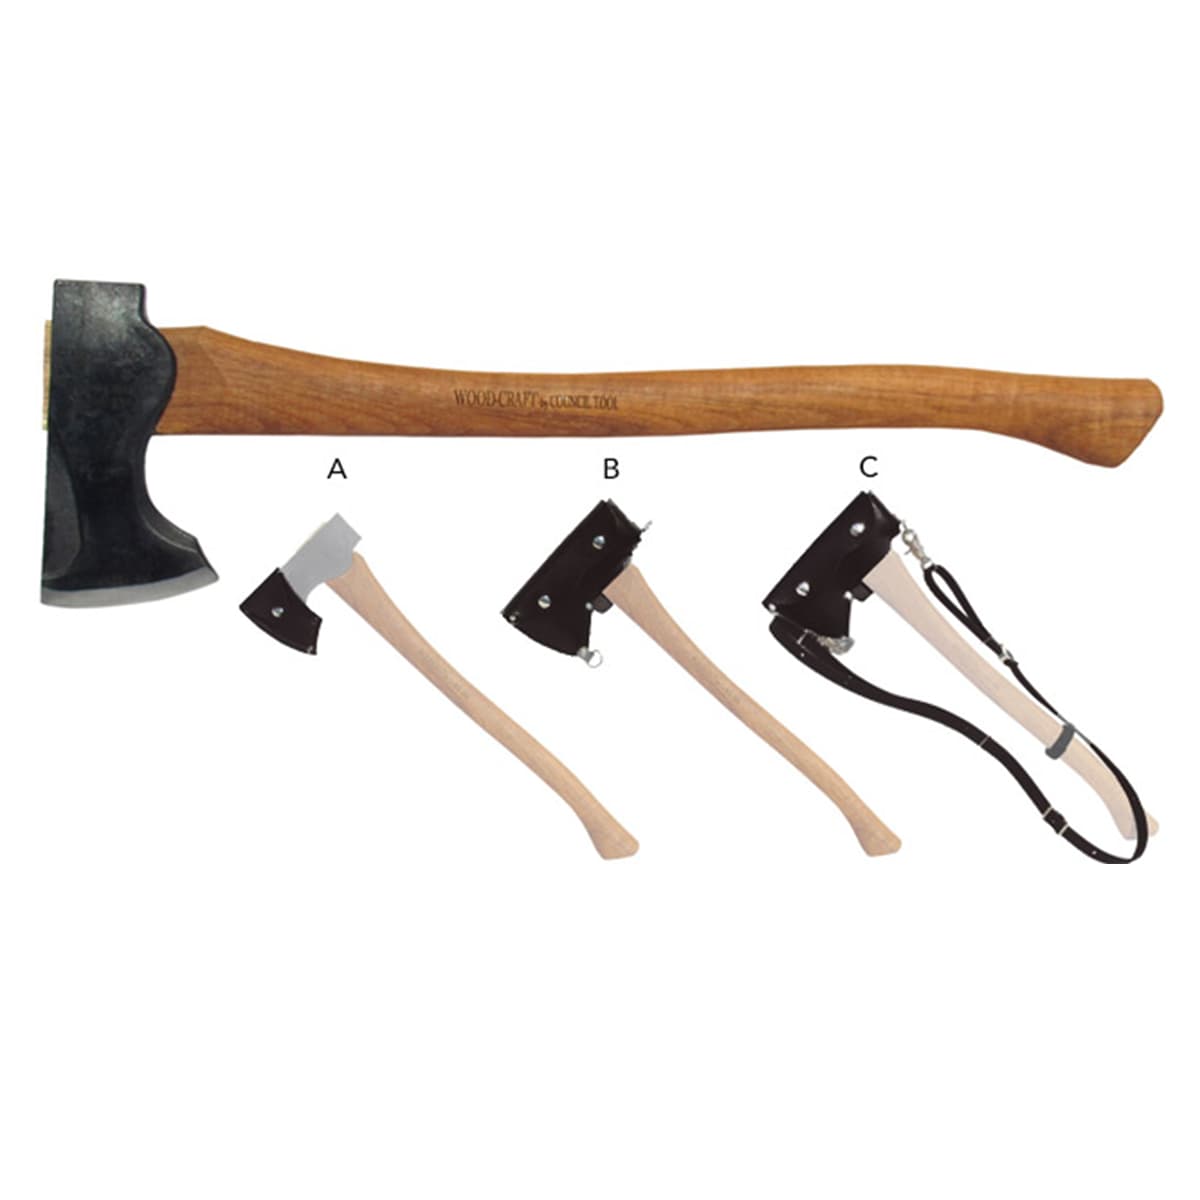 Wood-Craft Pack Axe with a 24